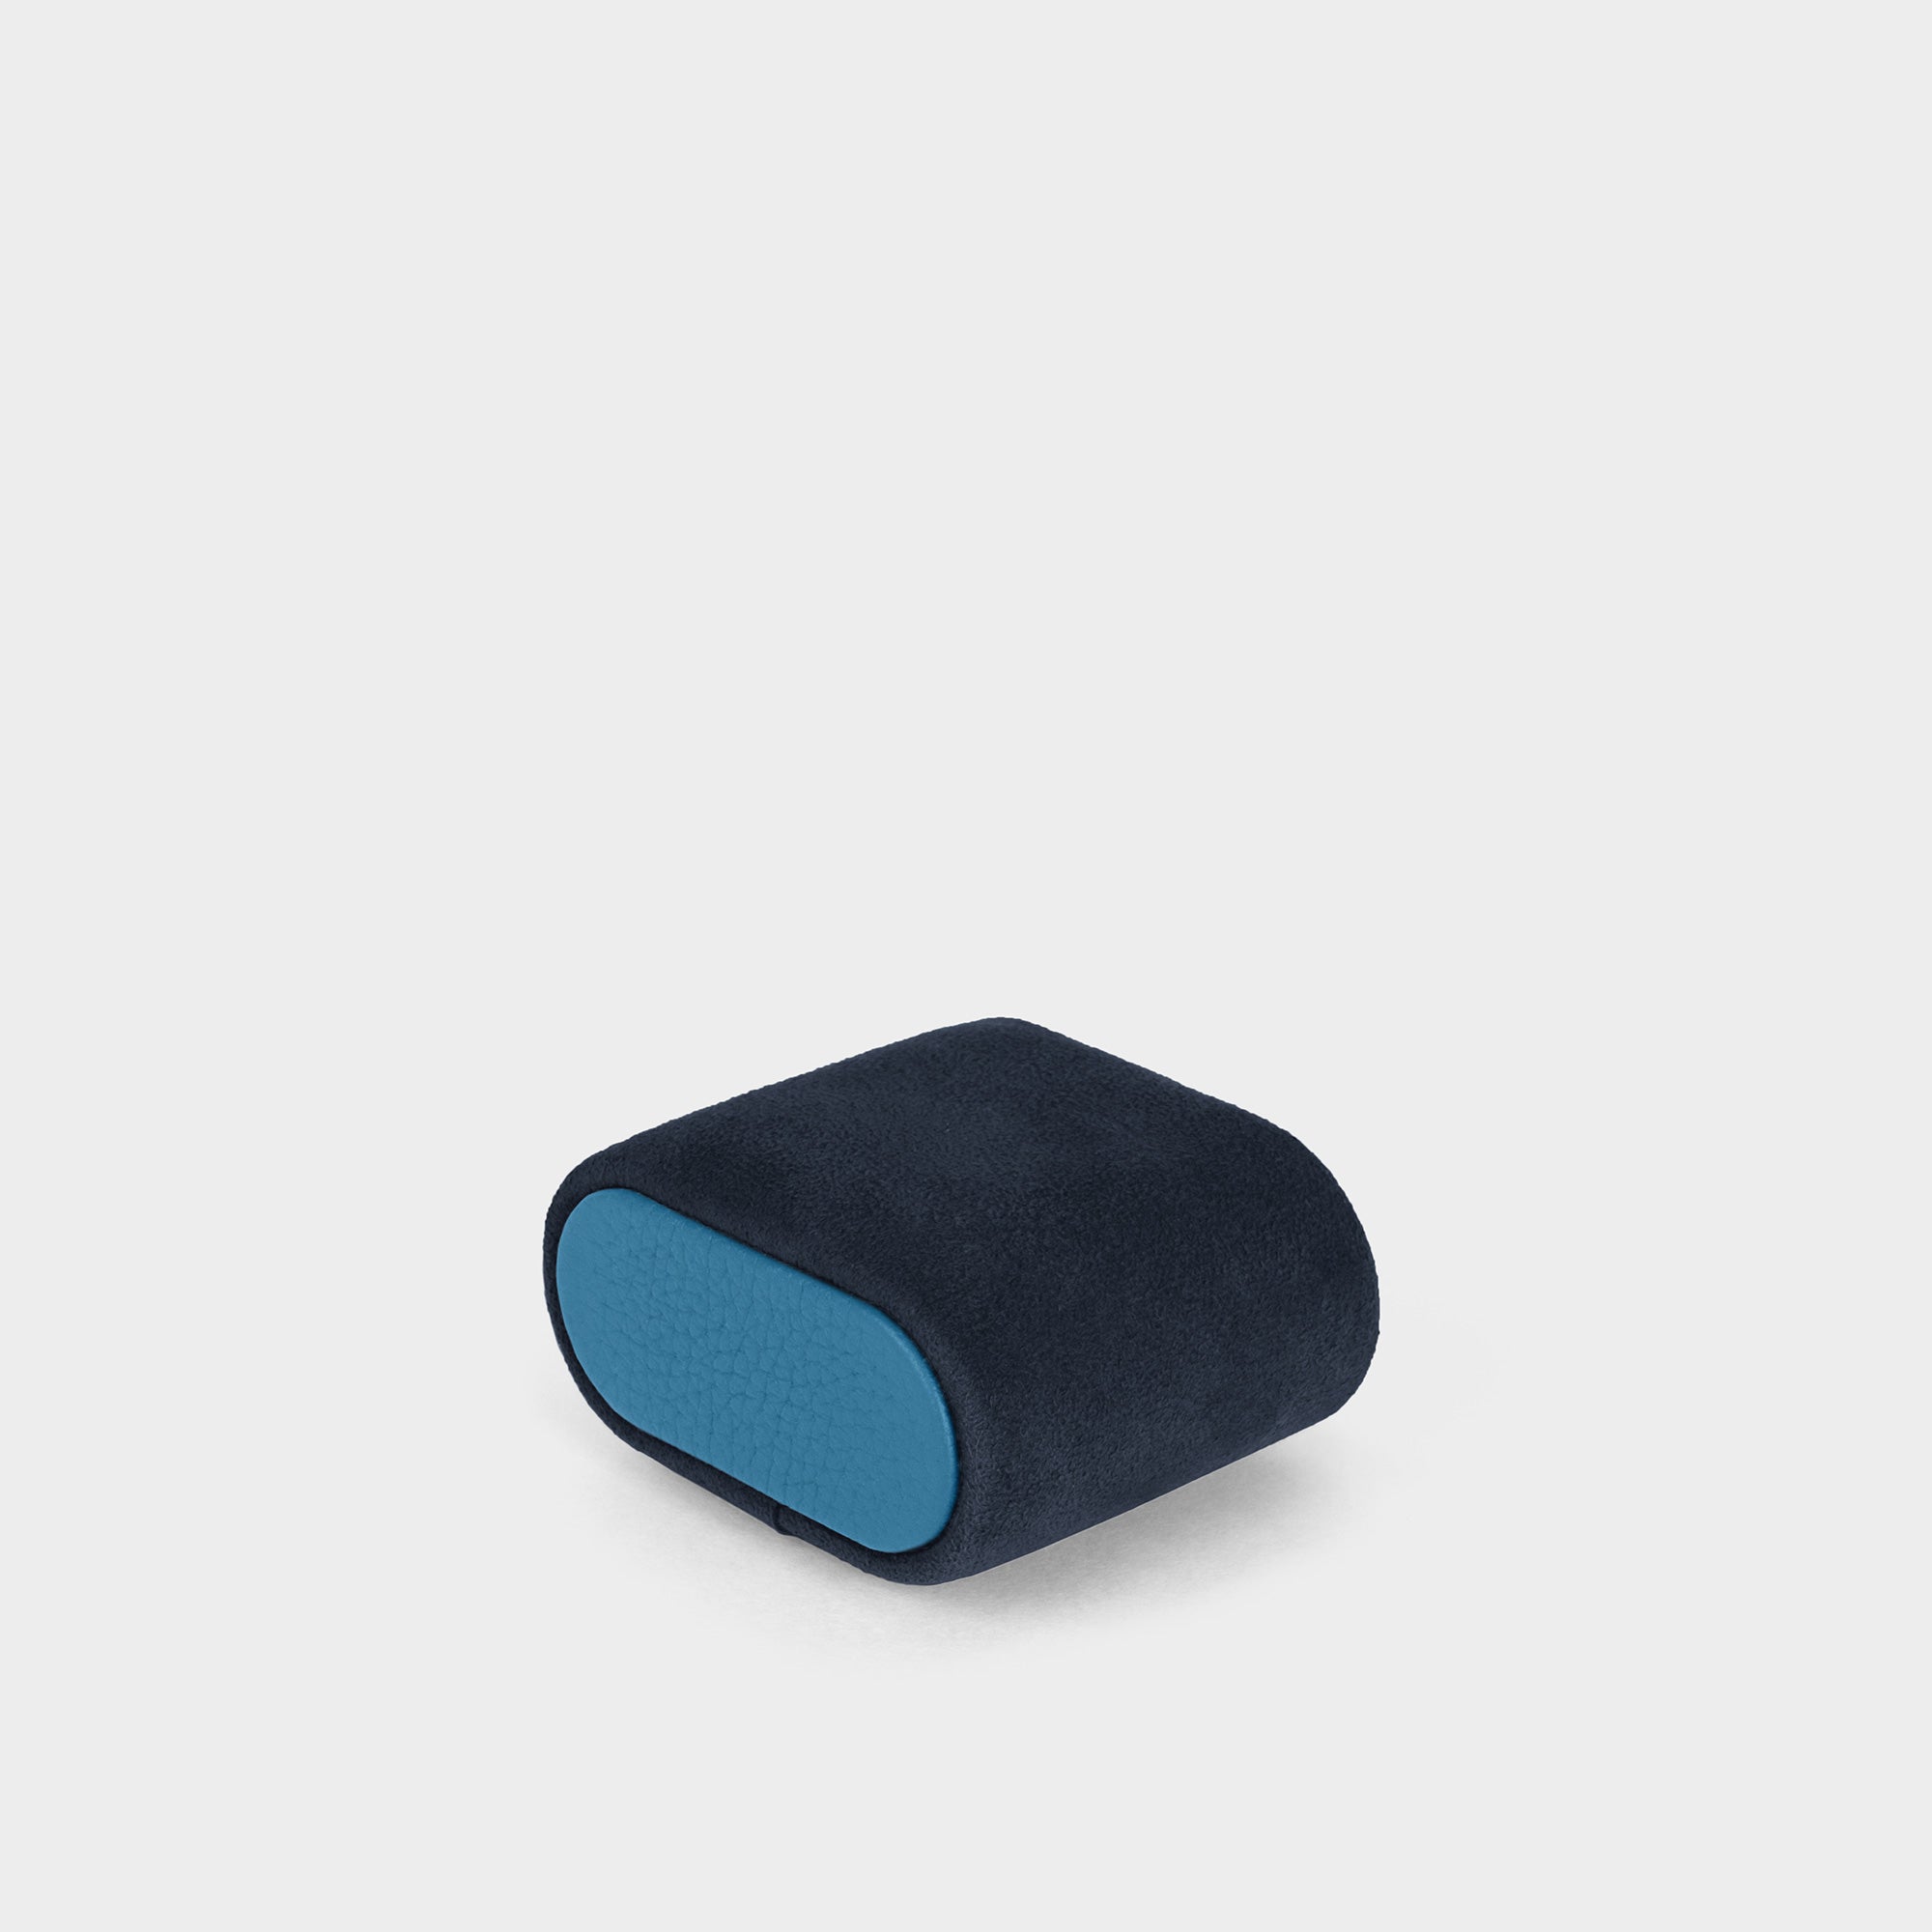 Product photo of watch cushion in deep blue with sky blue leather sides